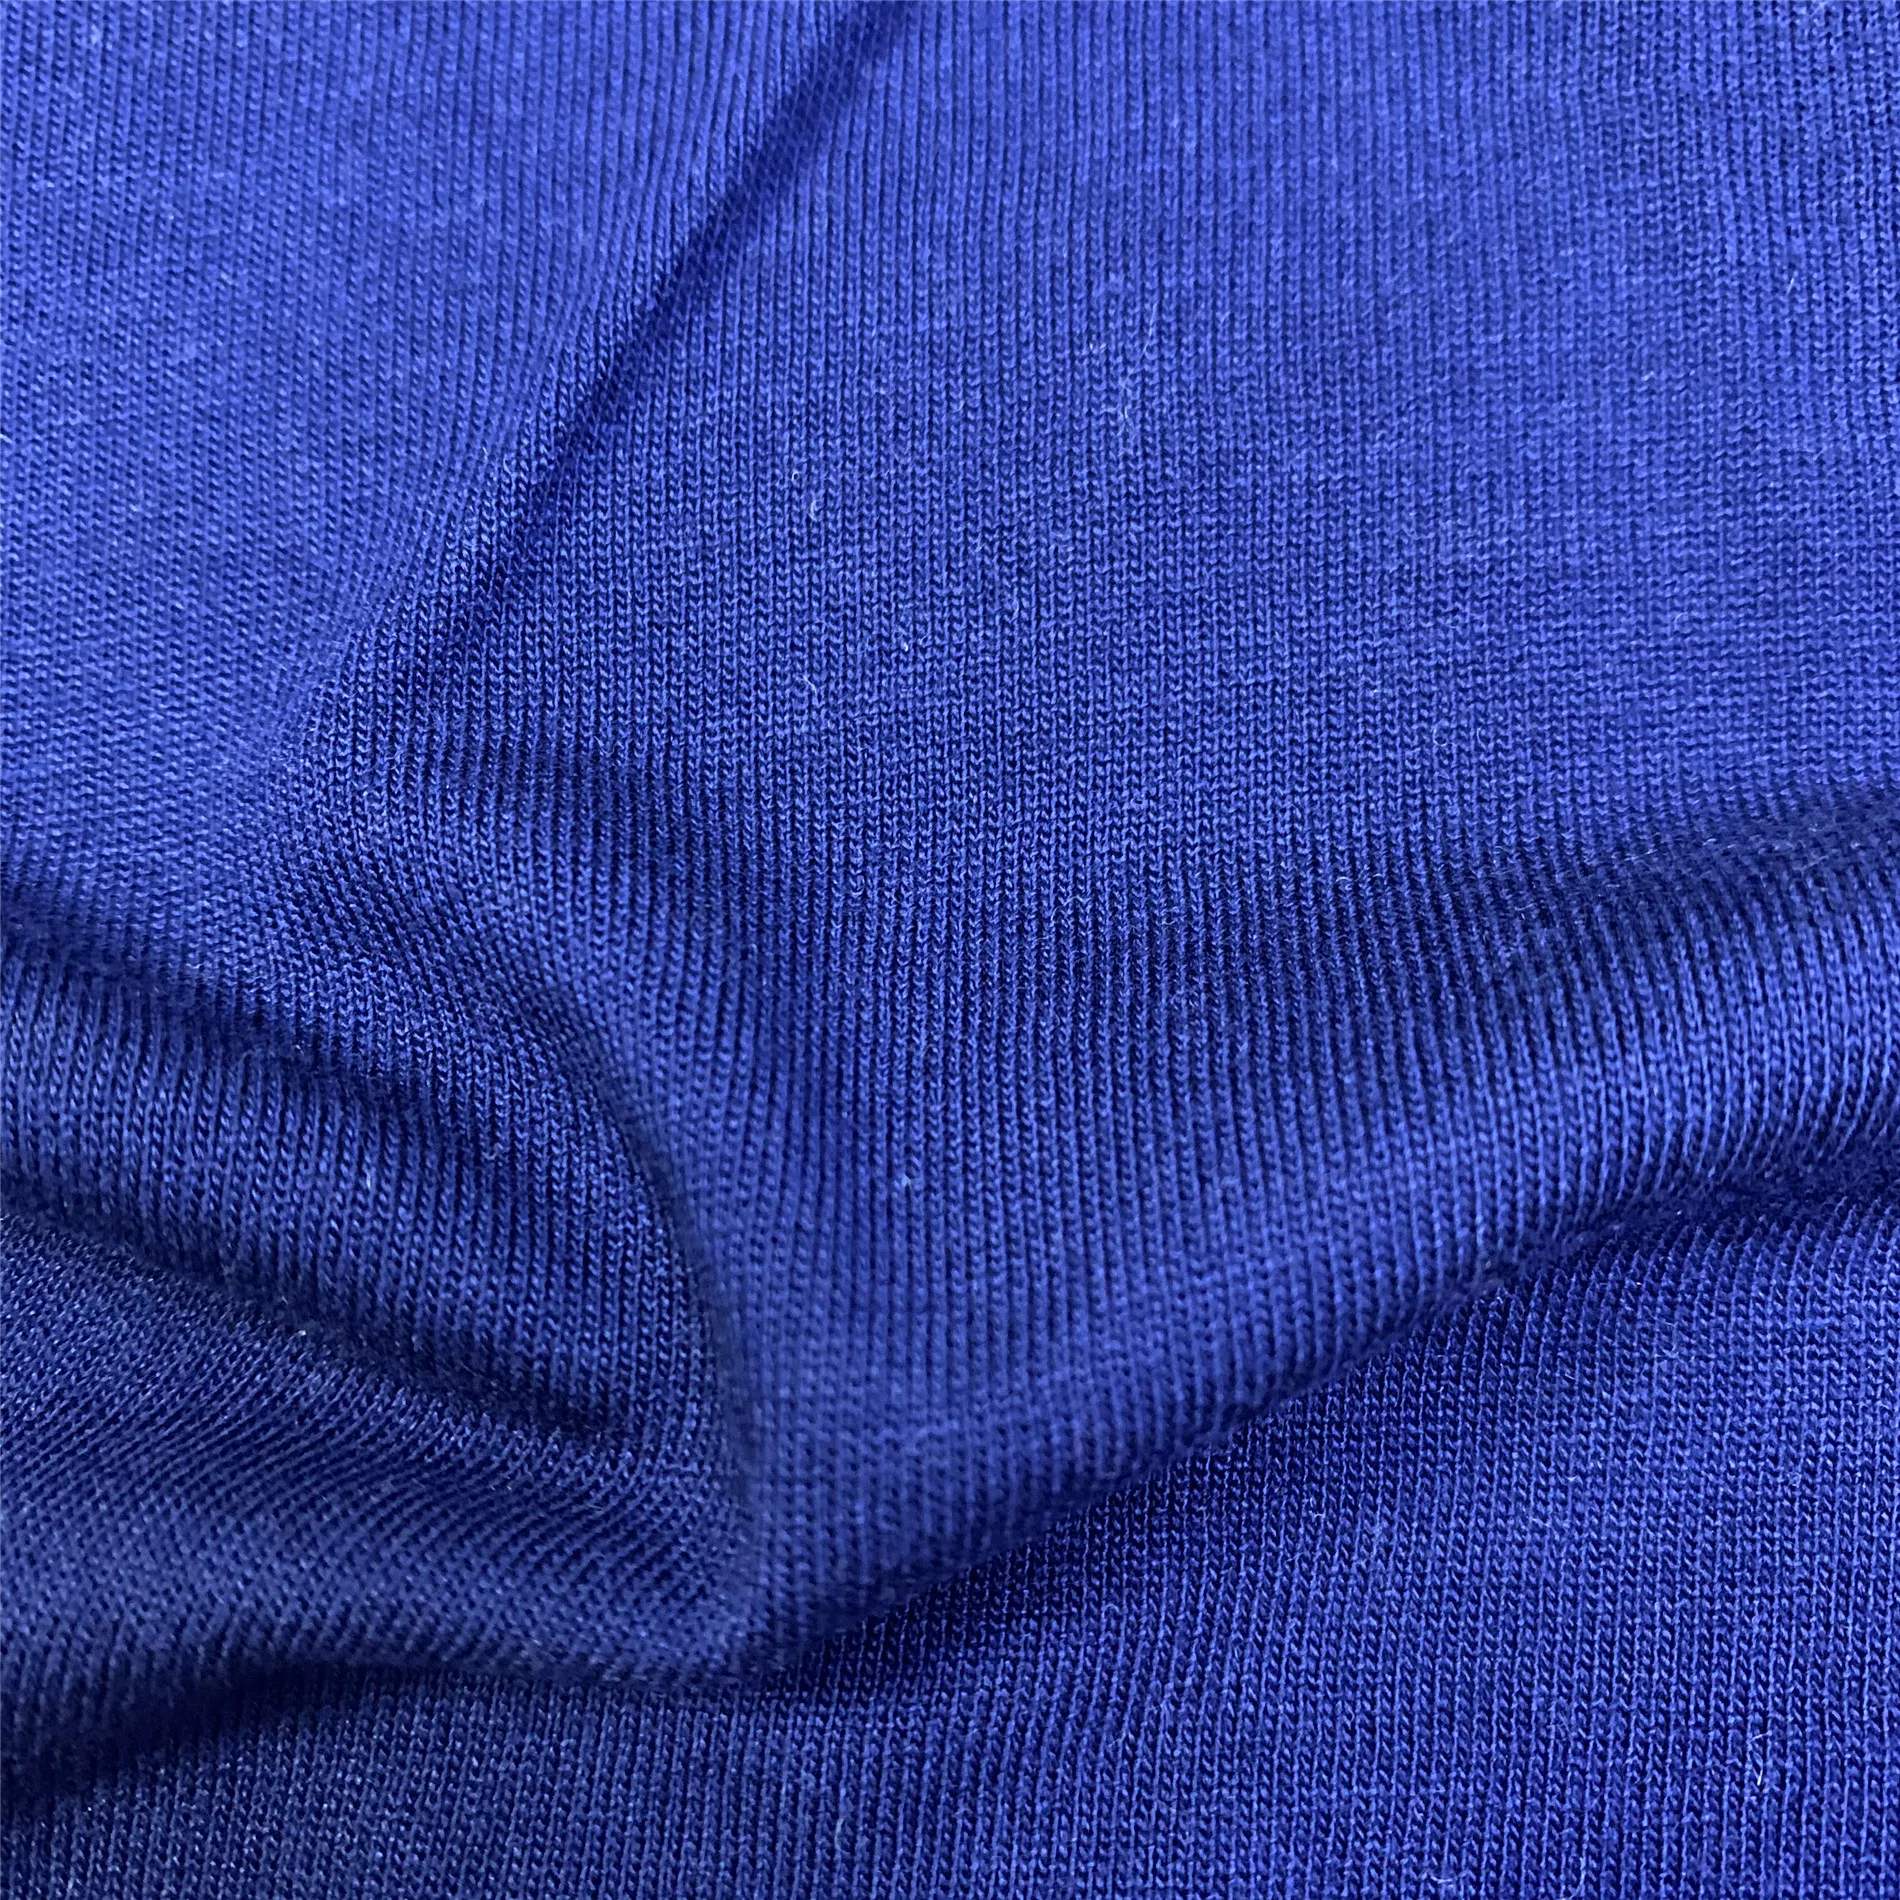 Recycled Dark Blue 160gsm Heavy Weight Pure Cotton Spandex Single Knit ...